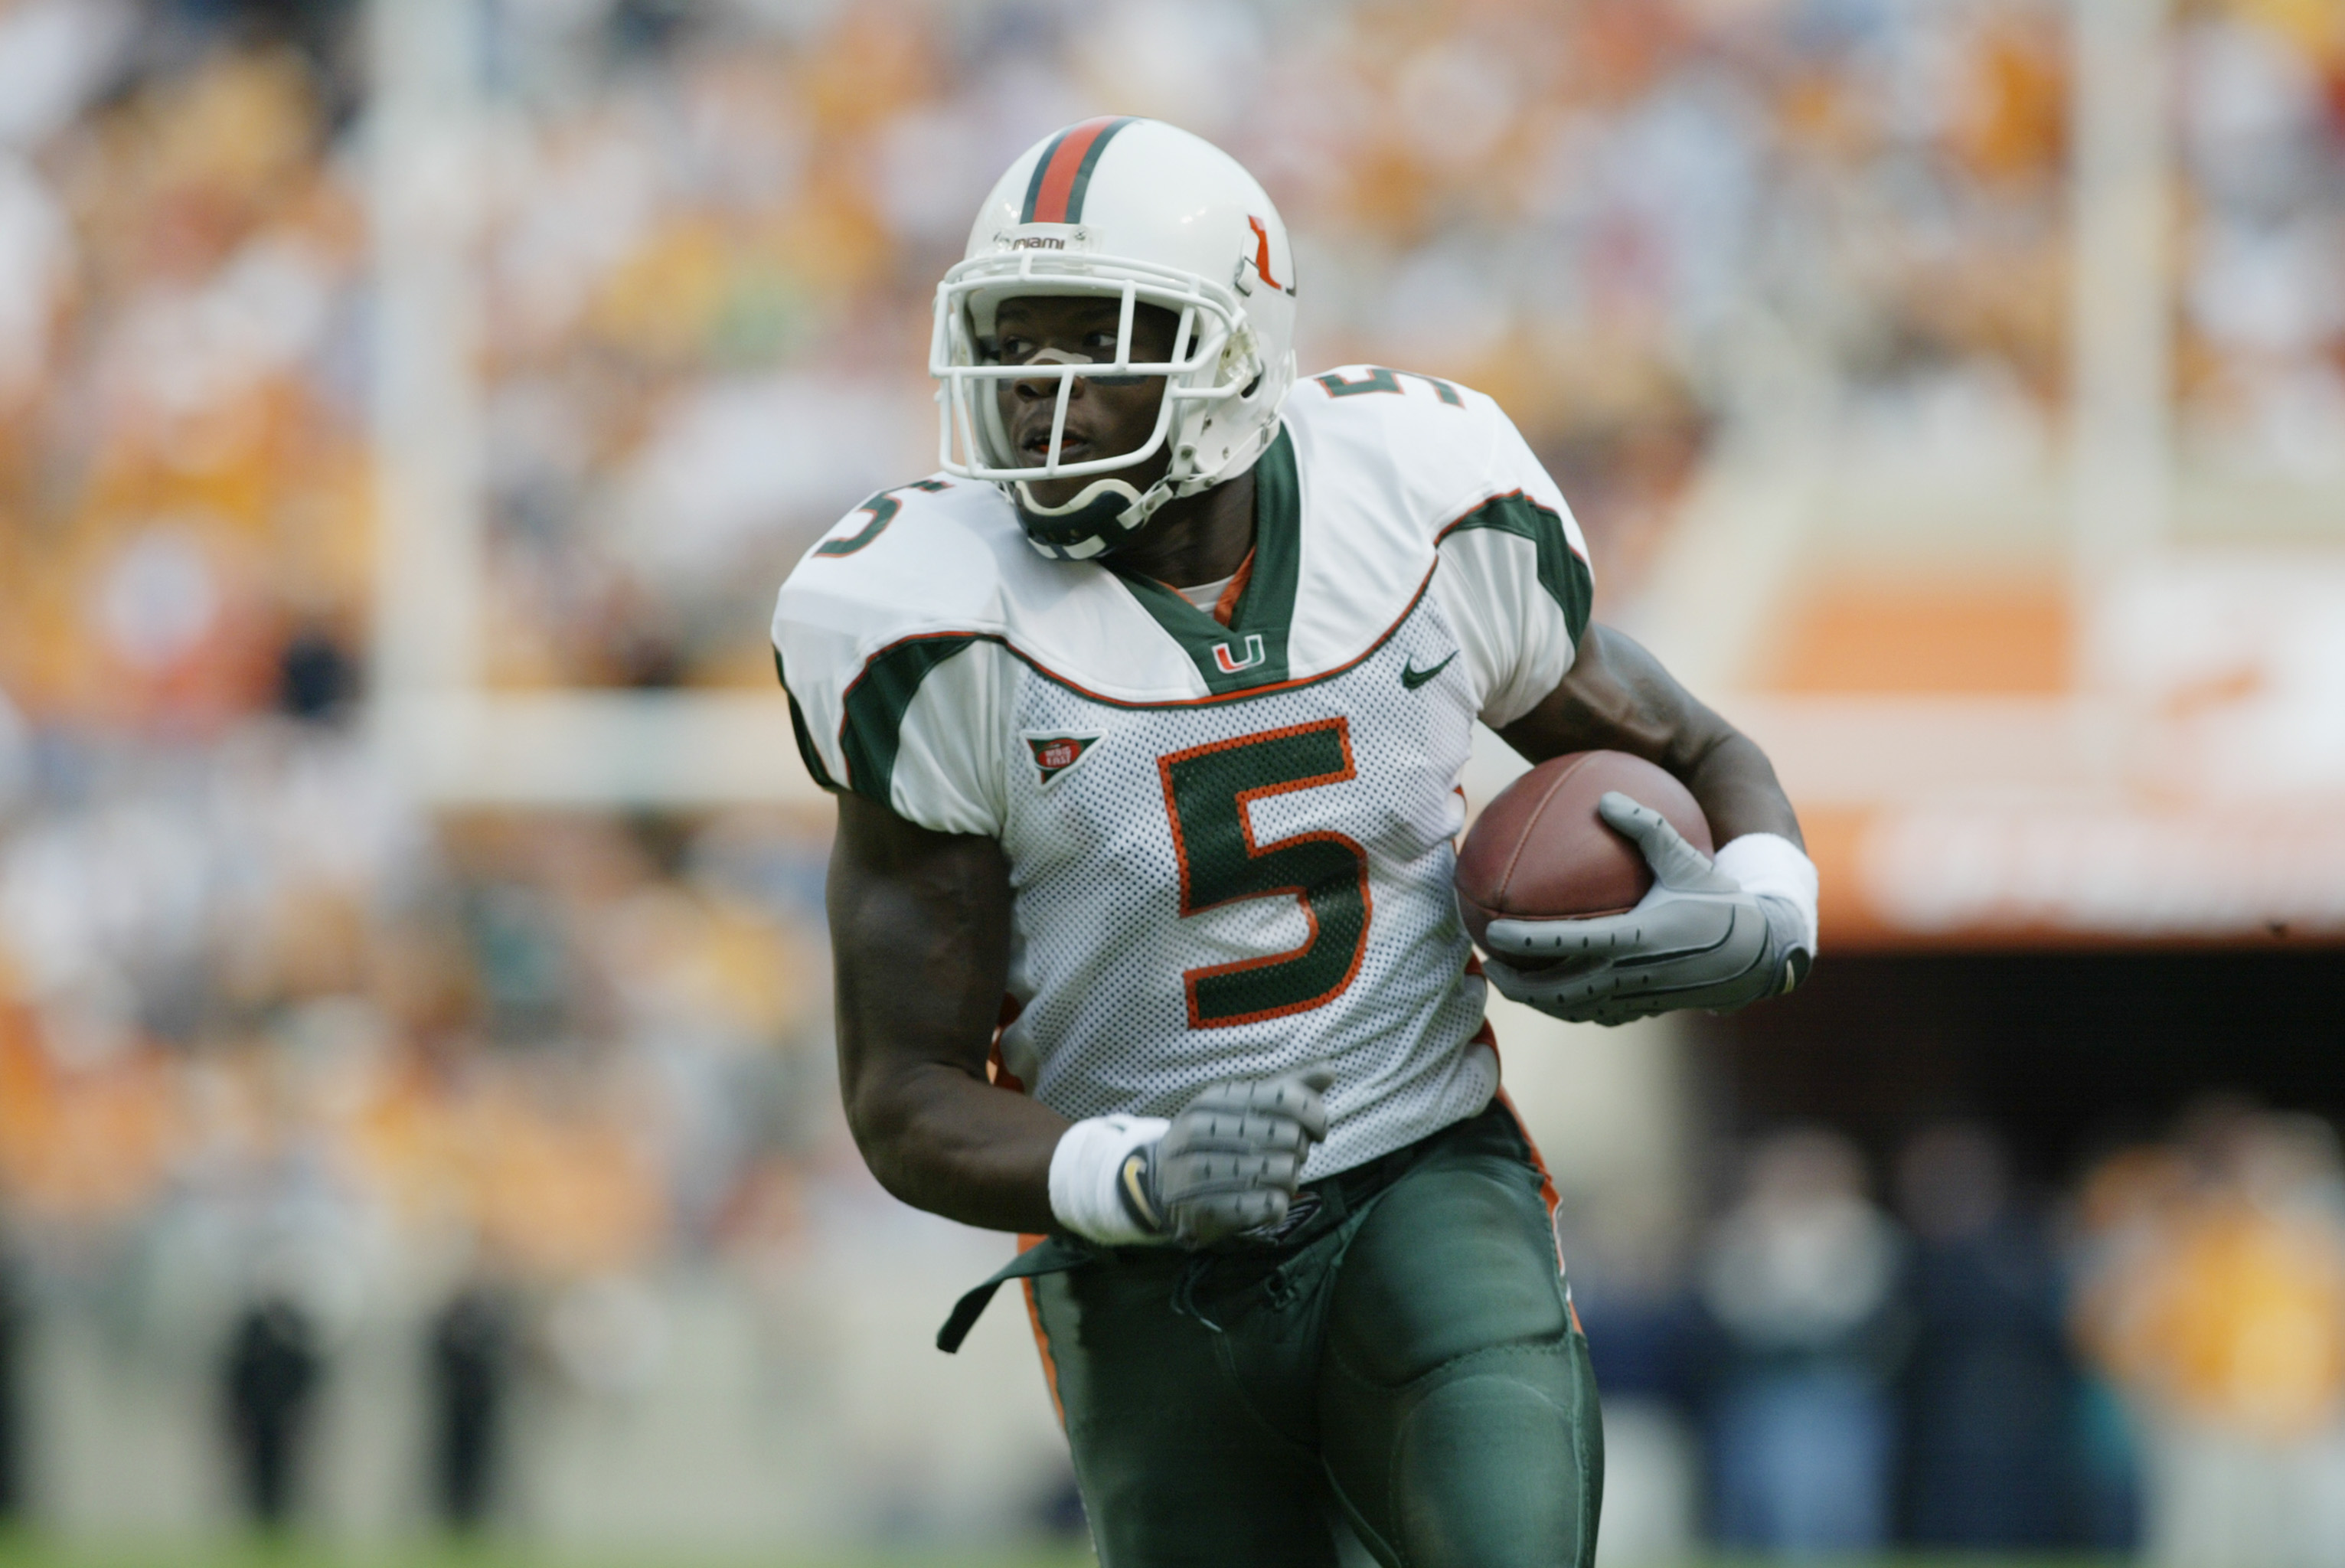 KNOXVILLE,TN - NOVEMBER 9:  Wide reciever Andre Johnson #5 of Miami carries the ball during the game against the Tennessee on November 9, 2002 at the Neyland Stadium in Knoxville, Tennessee.  (Photo by Andy Lyons/Getty Images)